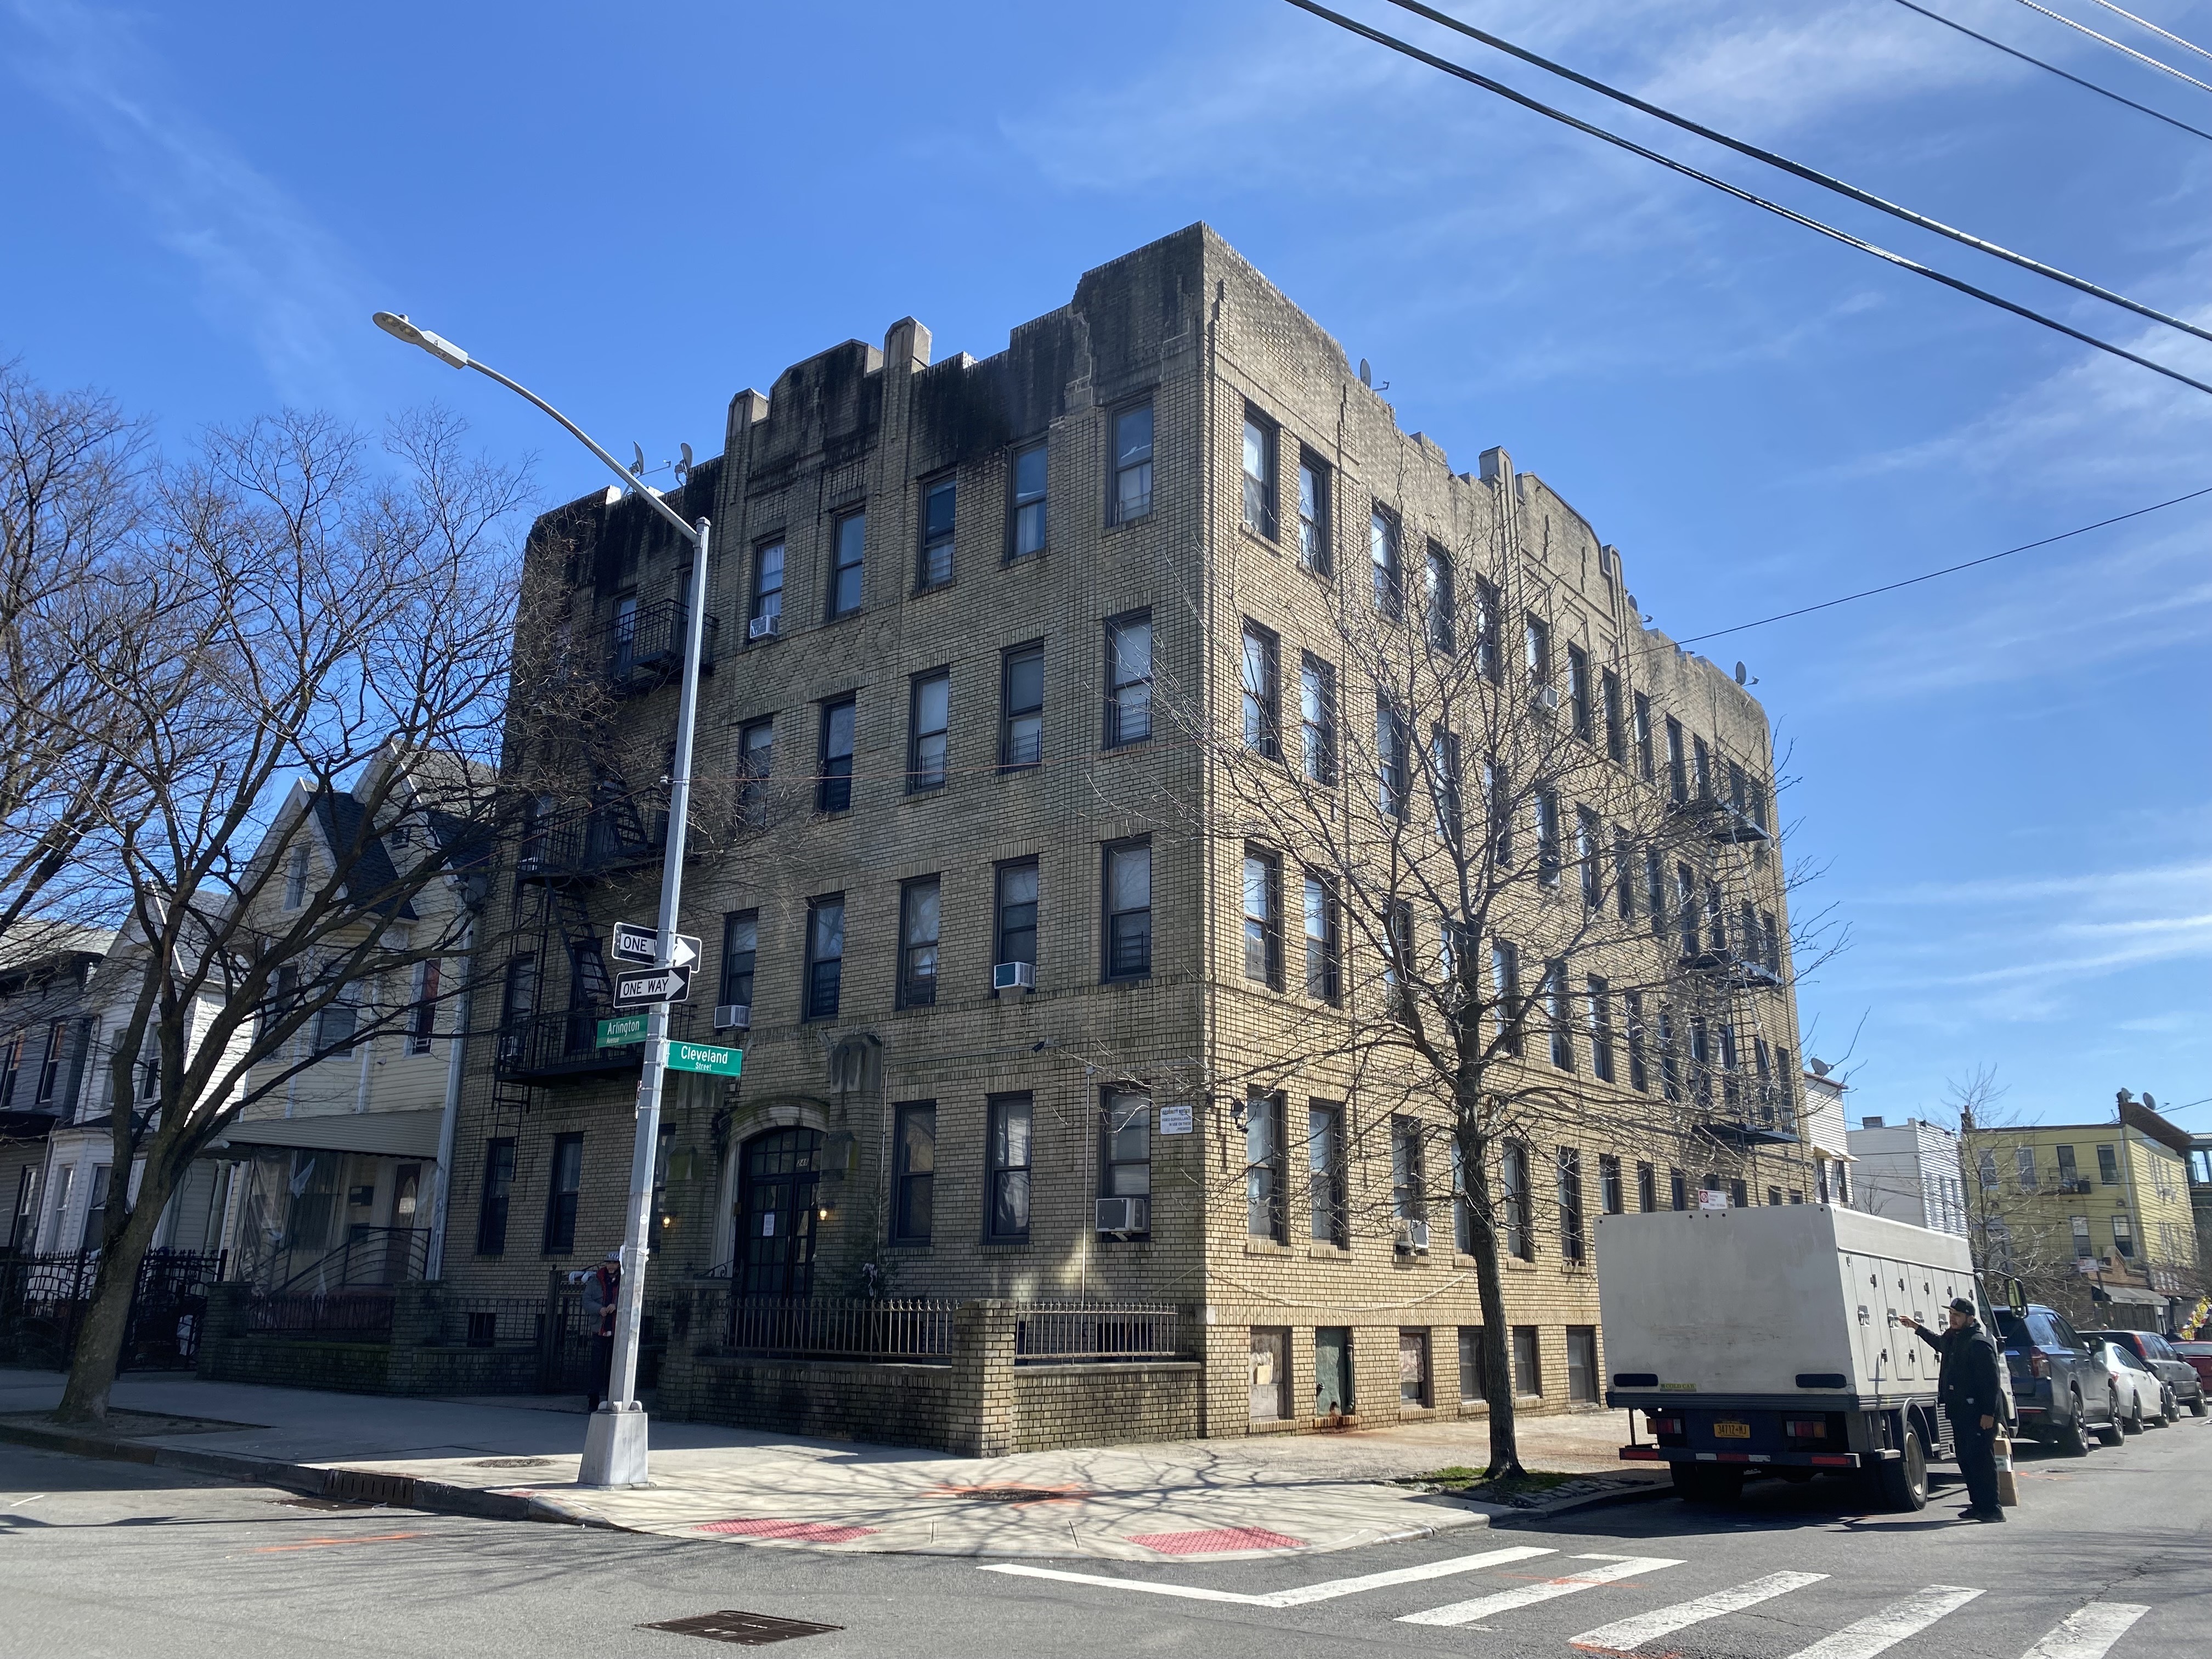 An exterior shot of the four floor brick building in the Cypress Hill neighborhood of East New York.